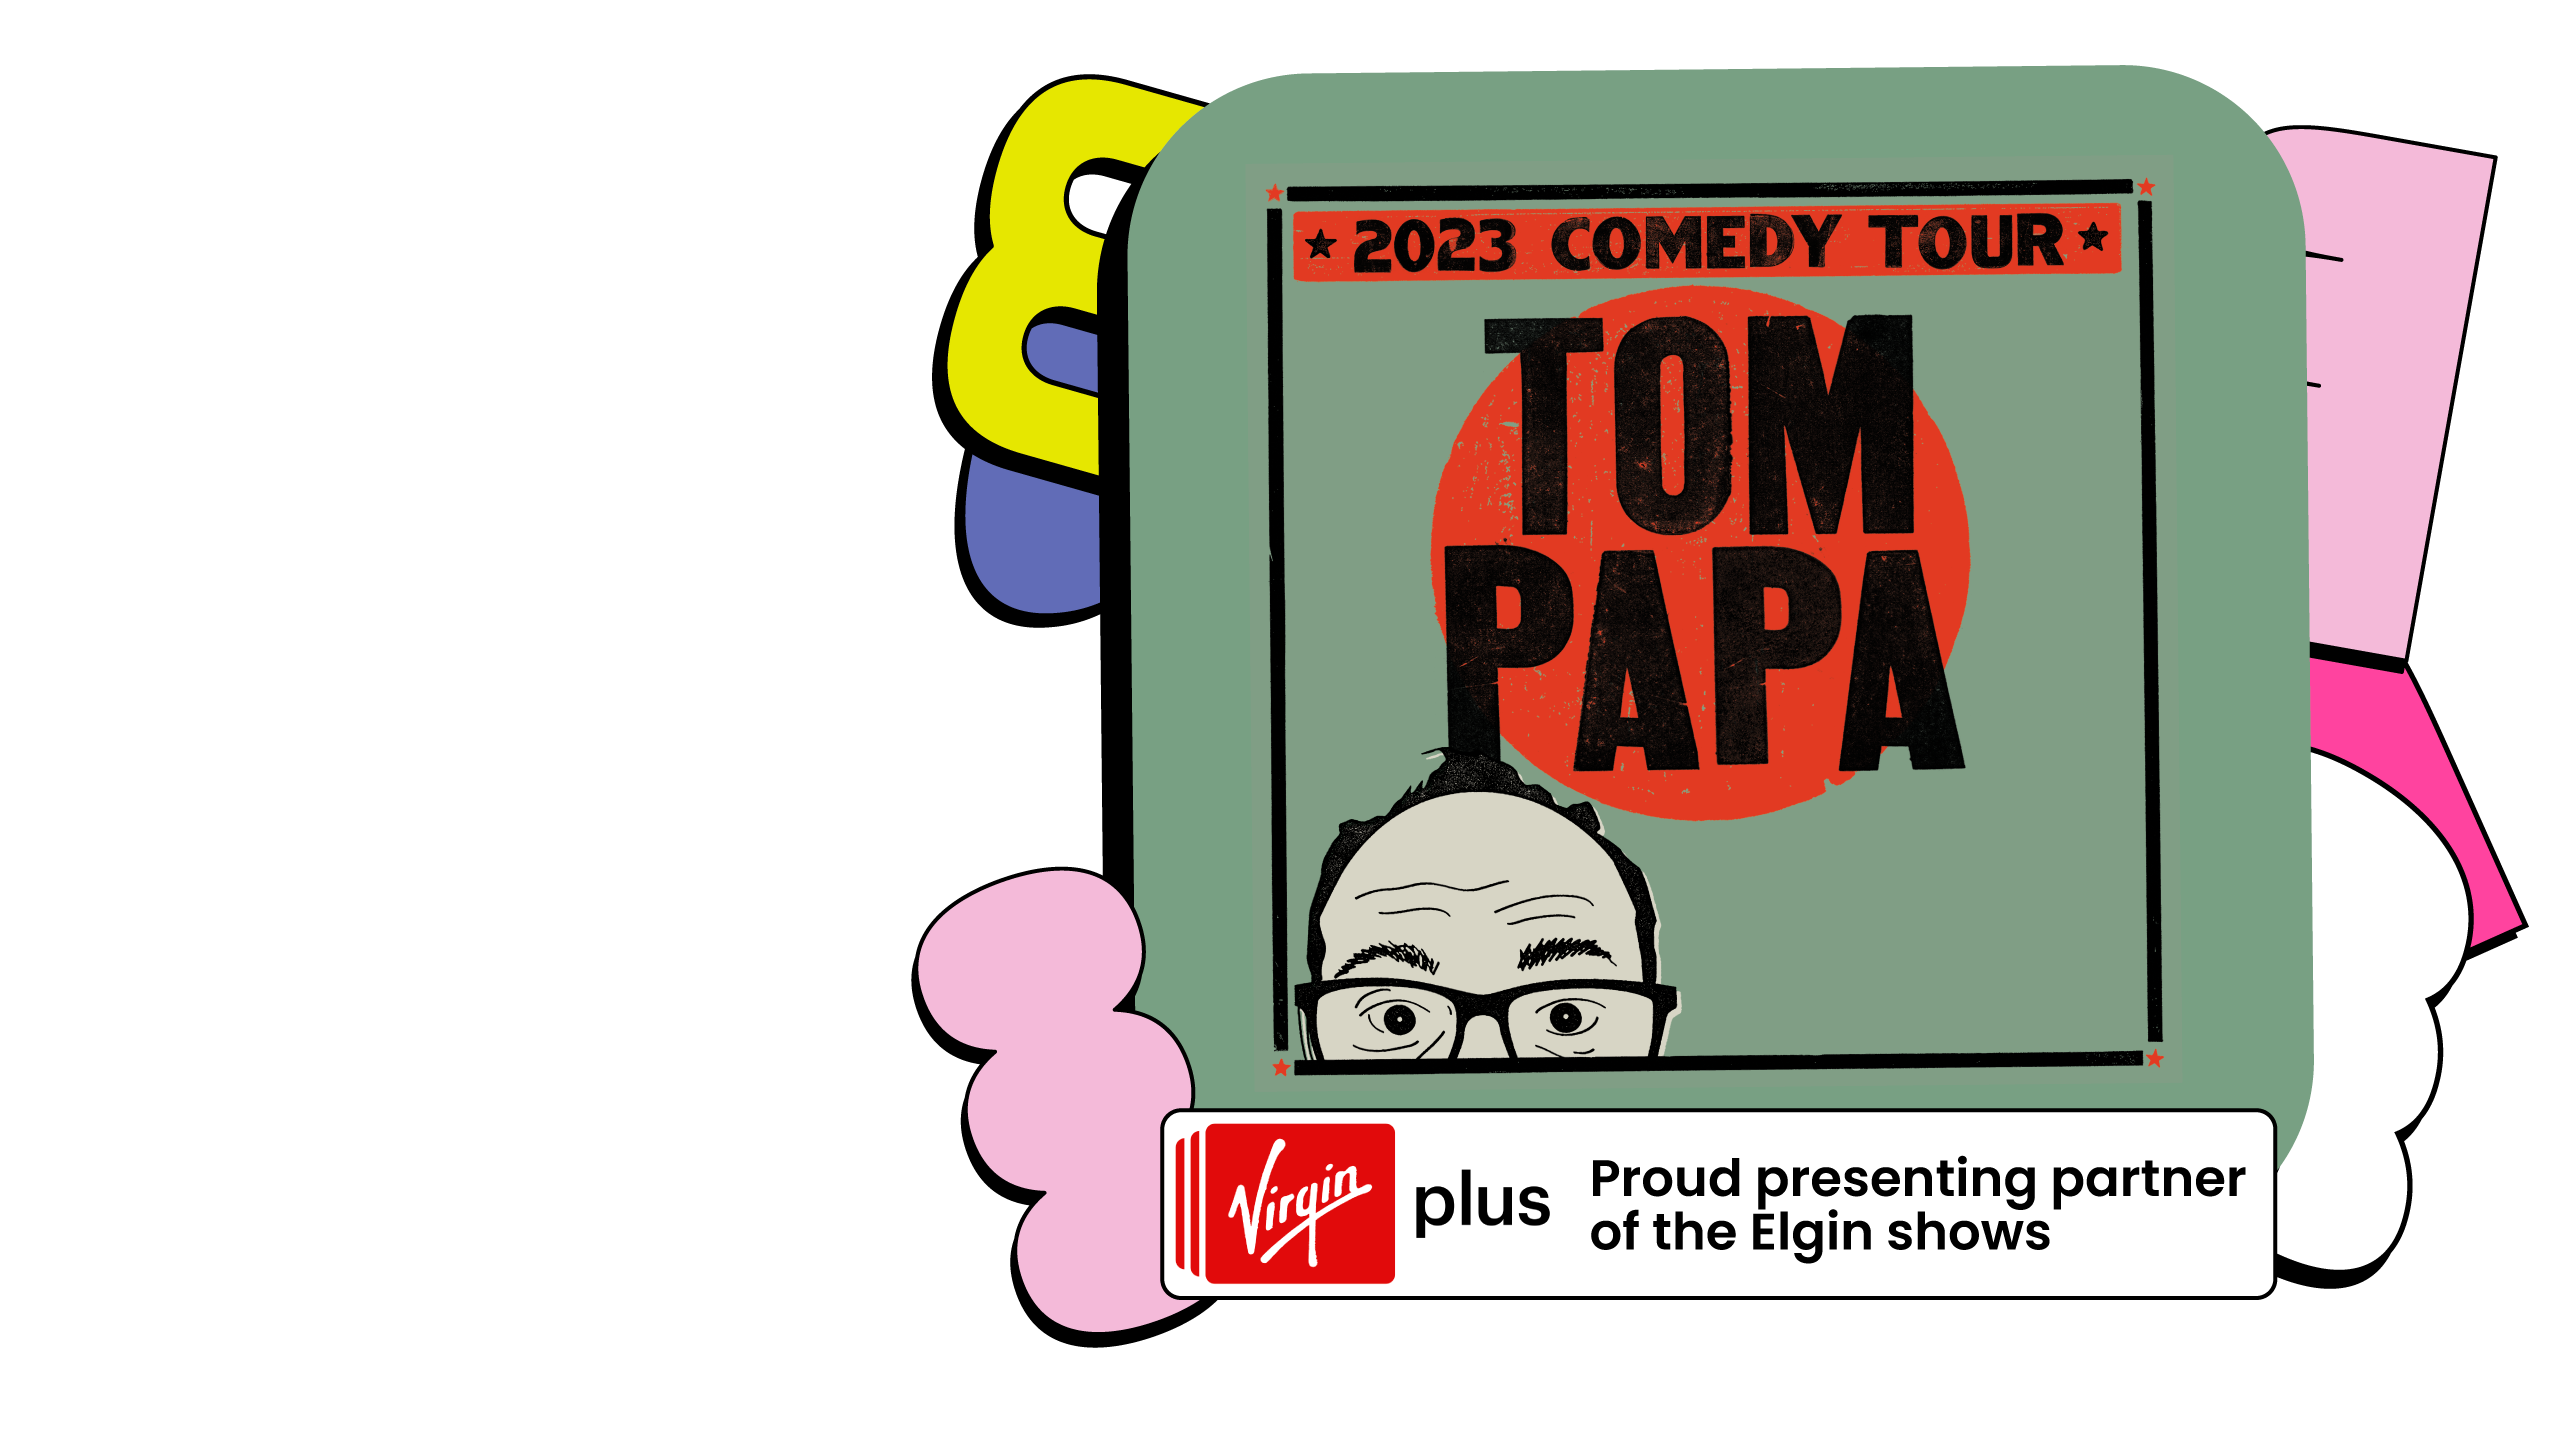 Promotional image for Tom Papa: 2023 Comedy Tour